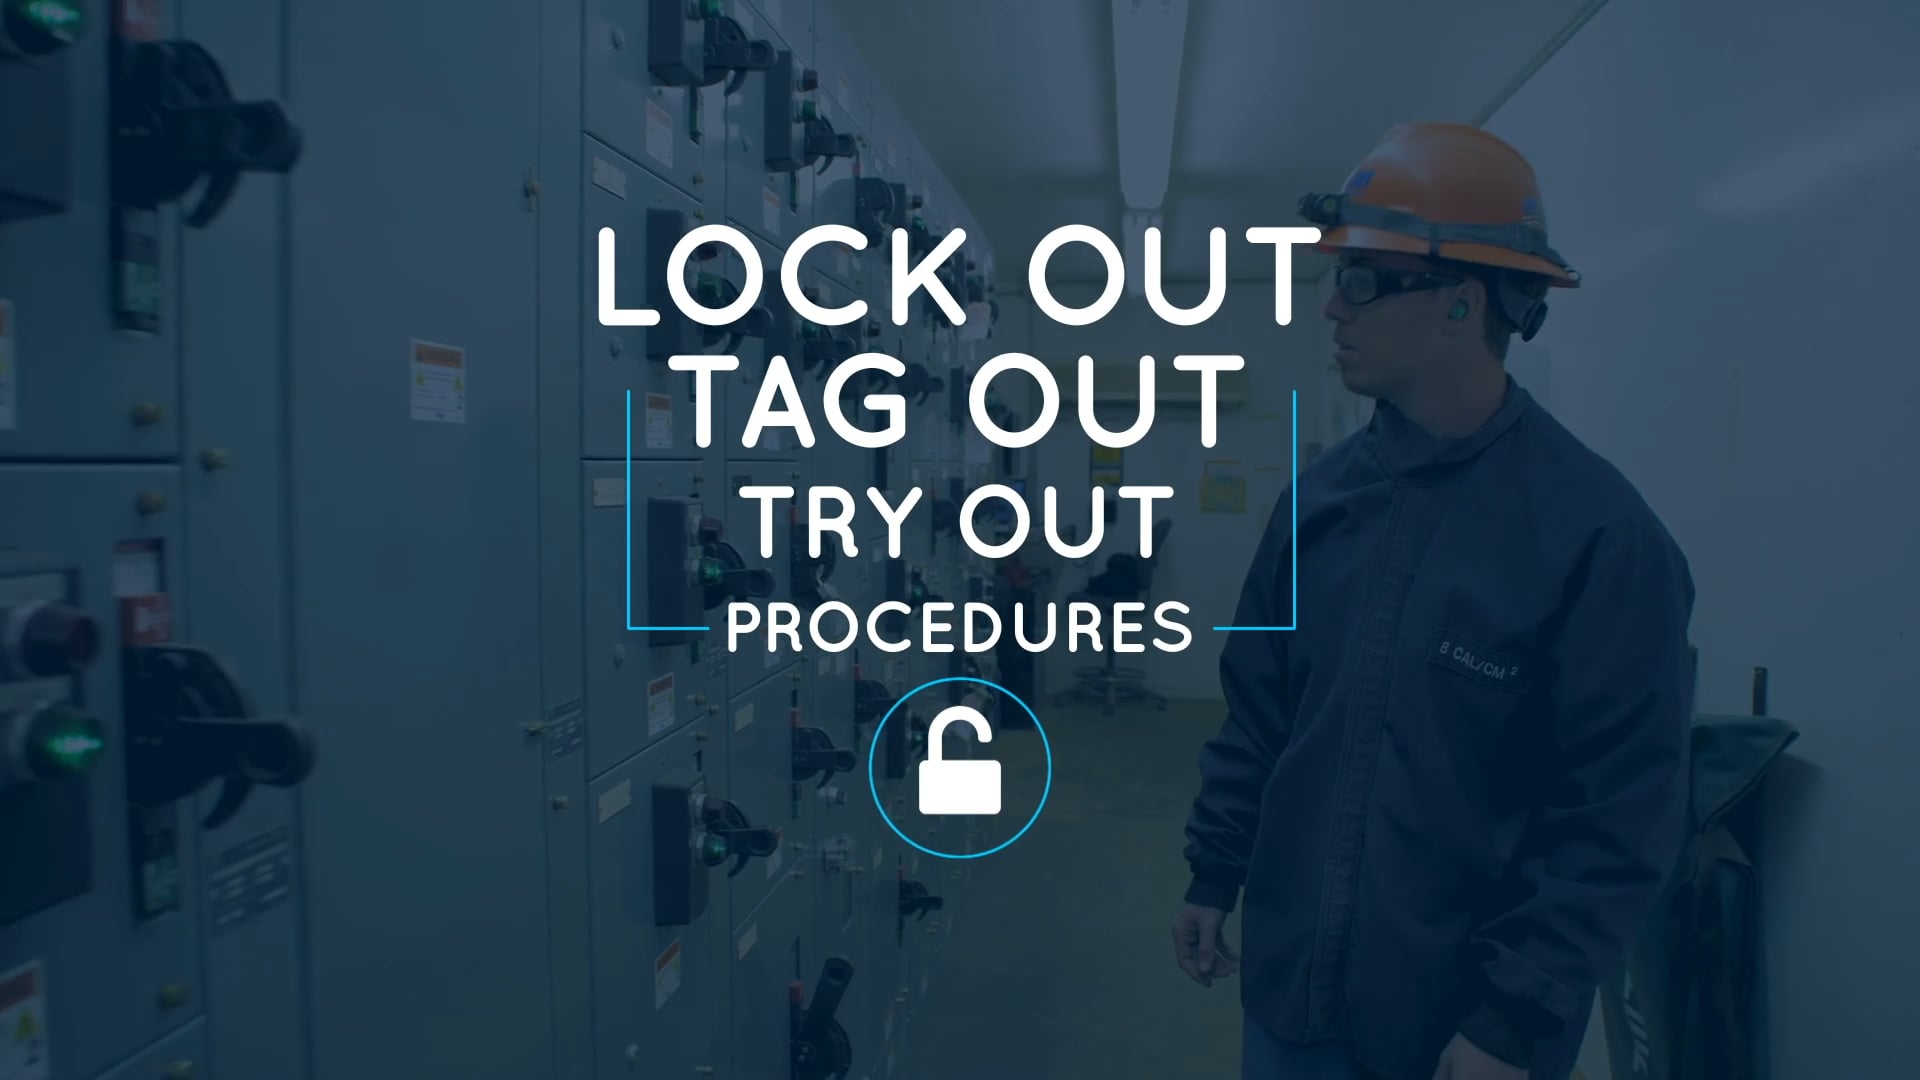 VMC Training - Lock Out. Tag Out.